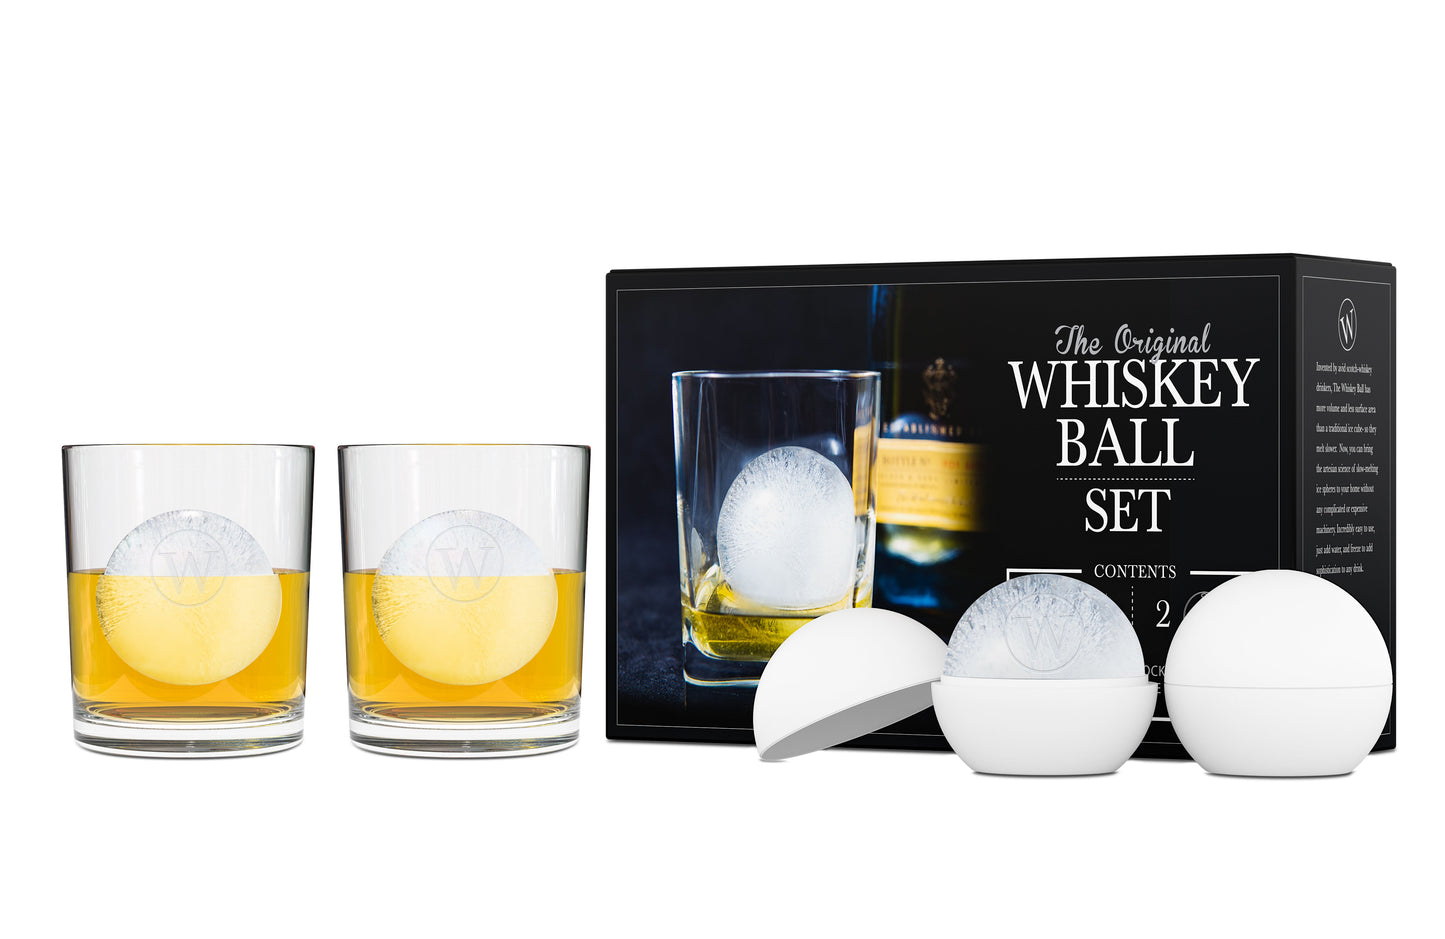 The Original Whiskey Ball by The Whiskey Ball